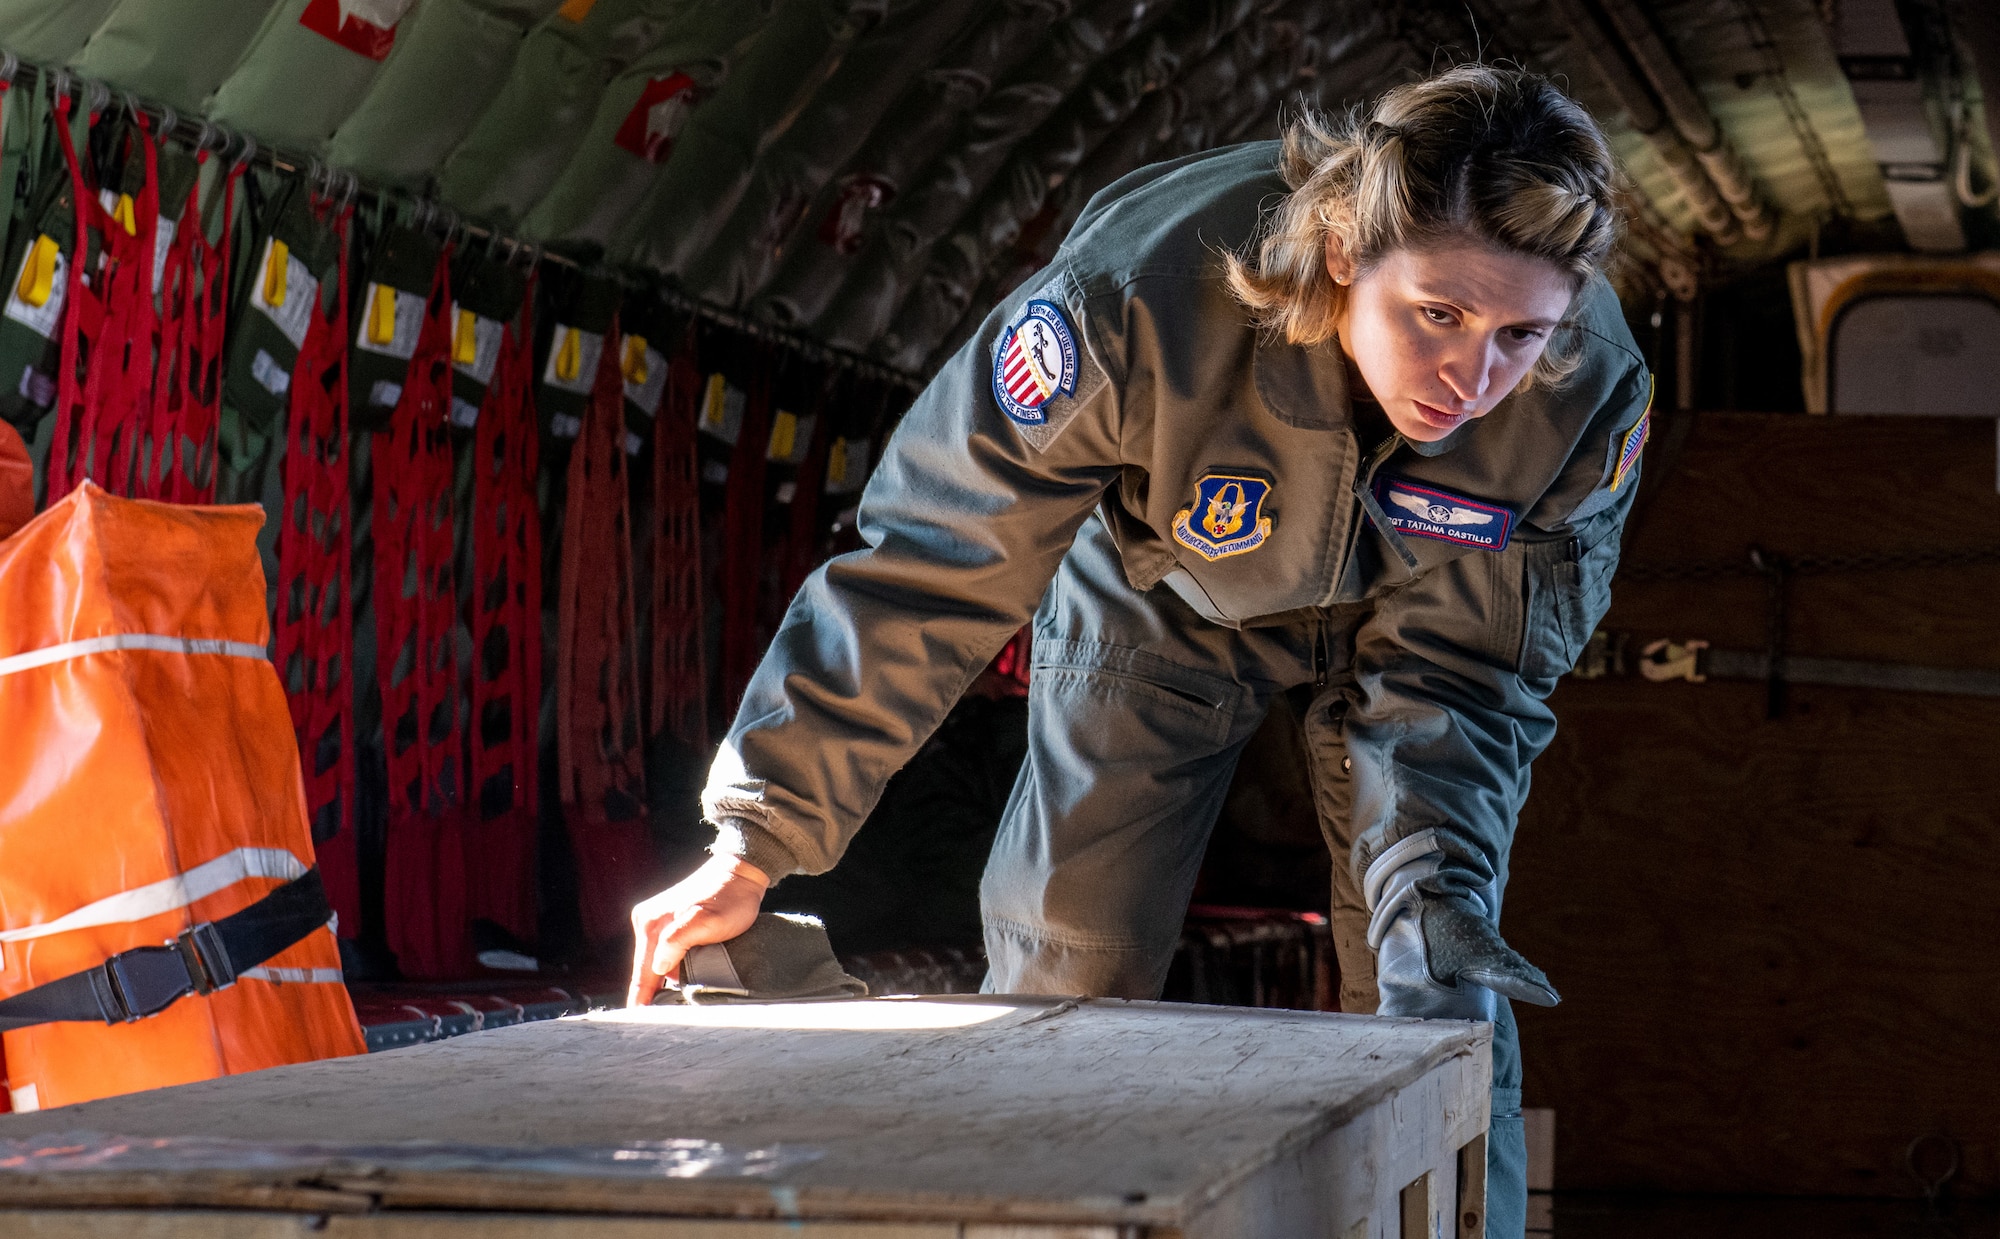 U.S. Air Force Tech. Sgt. Tatiana Castillo, 336th Air Refueling Squadron boom operator from March Air Reserve Base, California, inspects the alignment and securement of an empty casket box during a cargo loading exercise Feb. 5, 2022 at Hill Air Force Base, Utah